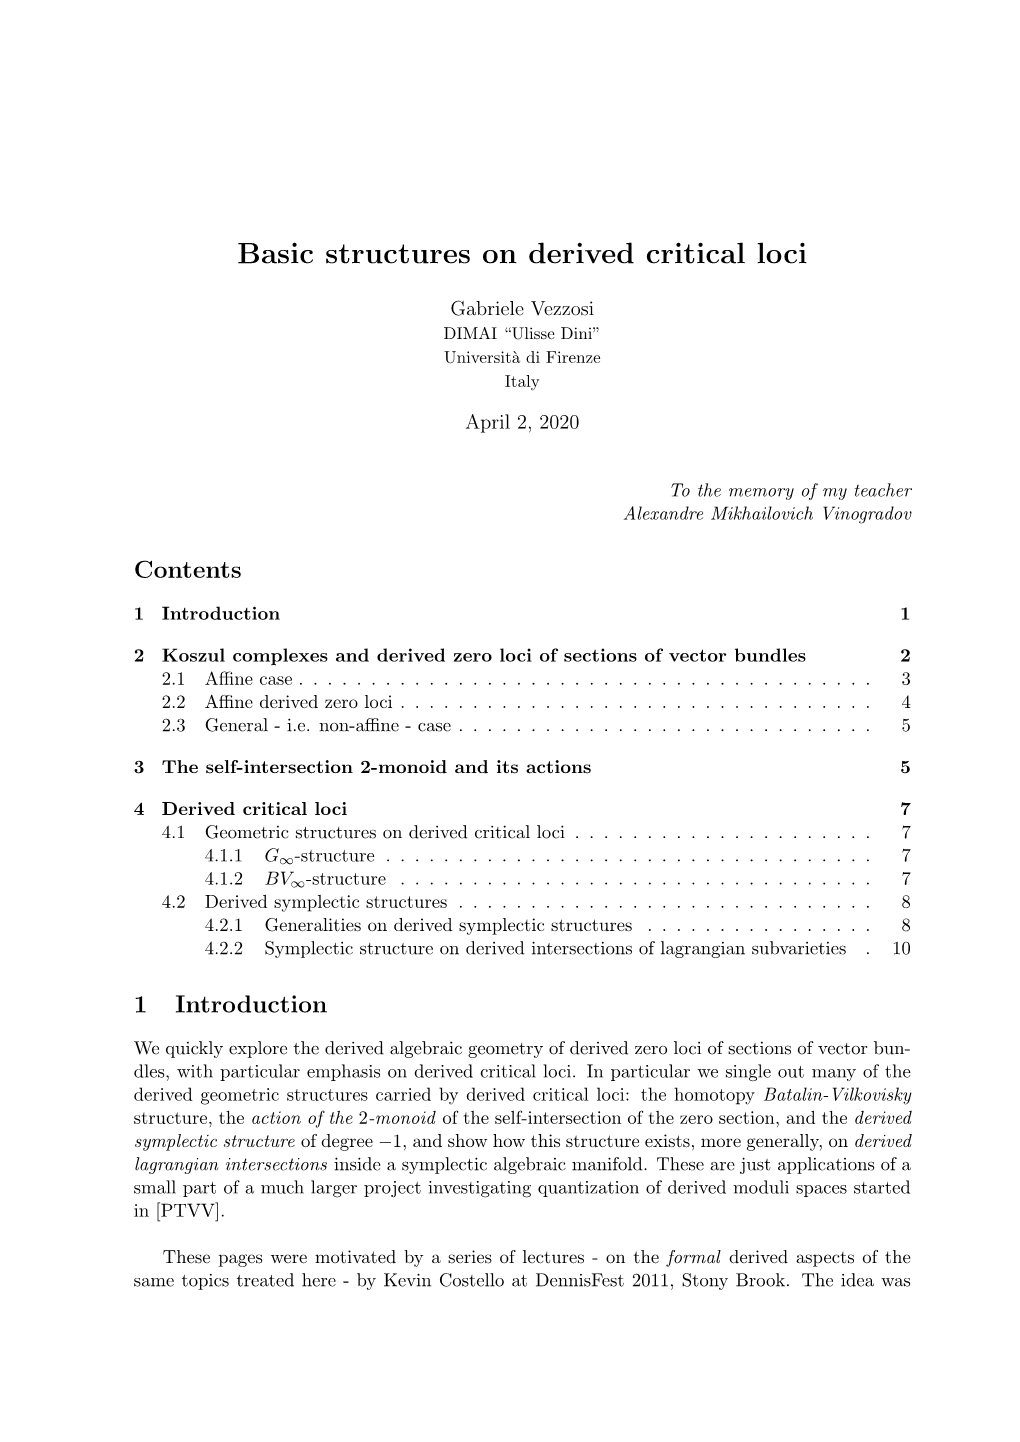 Basic Structures on Derived Critical Loci